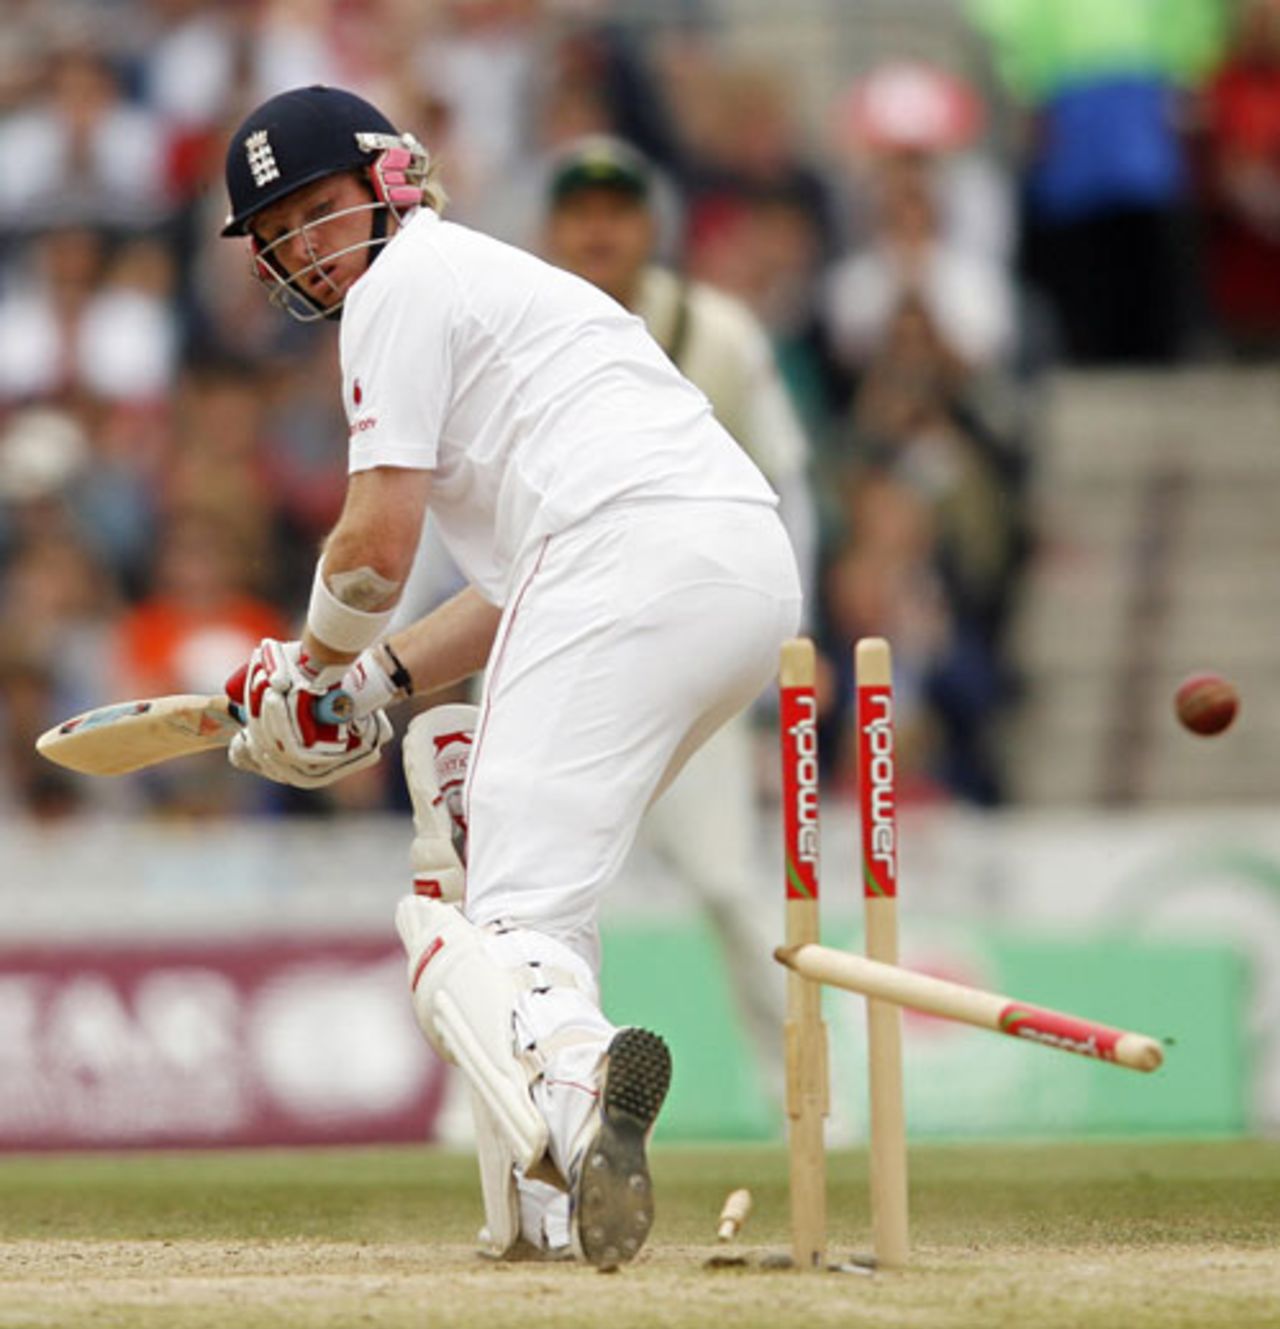 Ian Bell is bowled round his legs by Makhaya Ntini, England v South Africa, 4th Test, The Oval, August 11, 2008